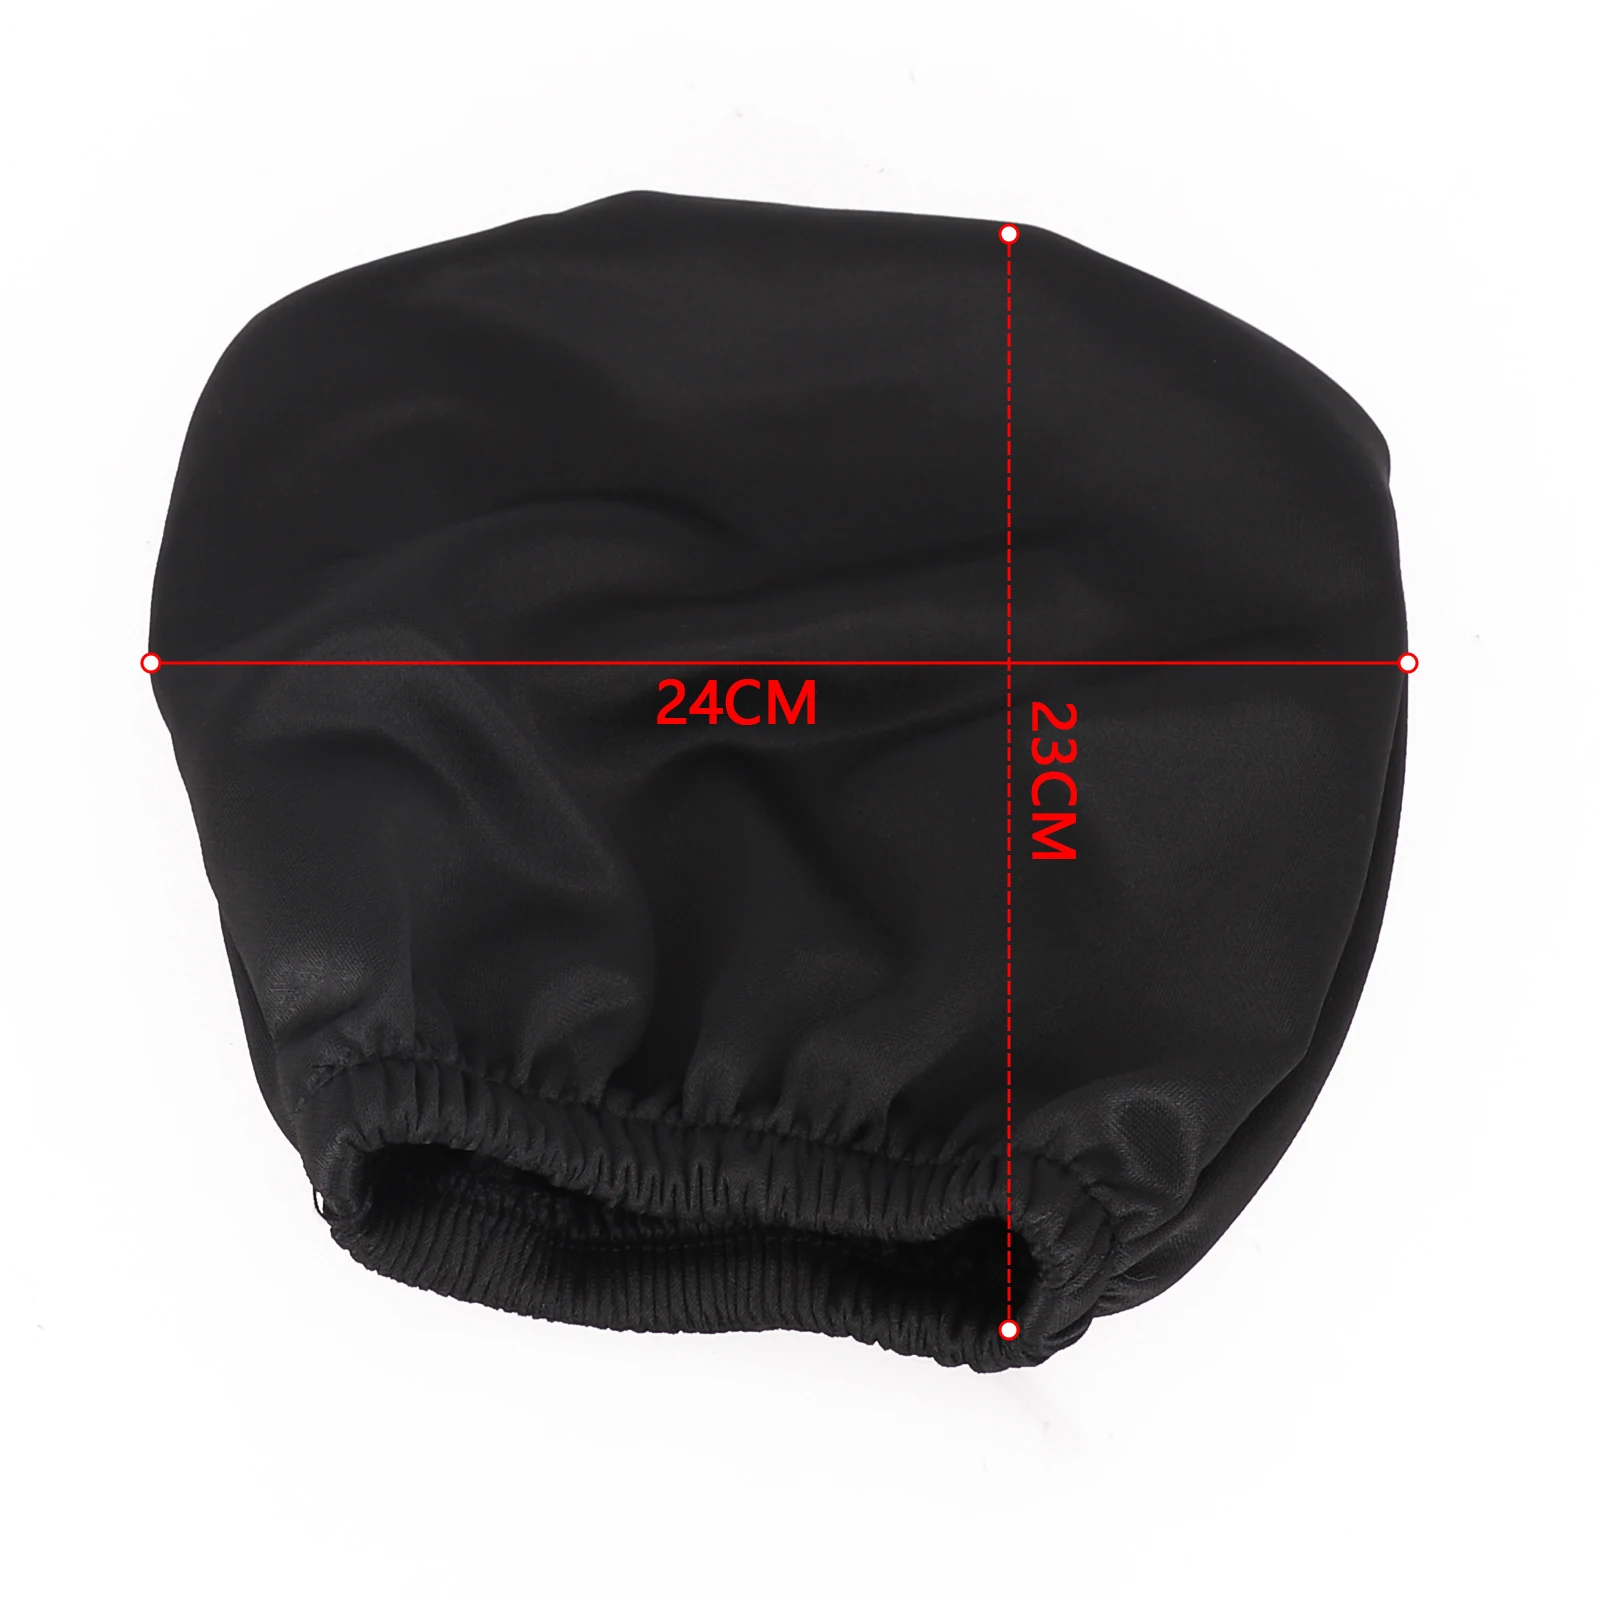 

Say Goodbye to Boring Car Seats Upgrade with Black Premium Cloth Headrest Cover for Car Truck SUV Universal Fit